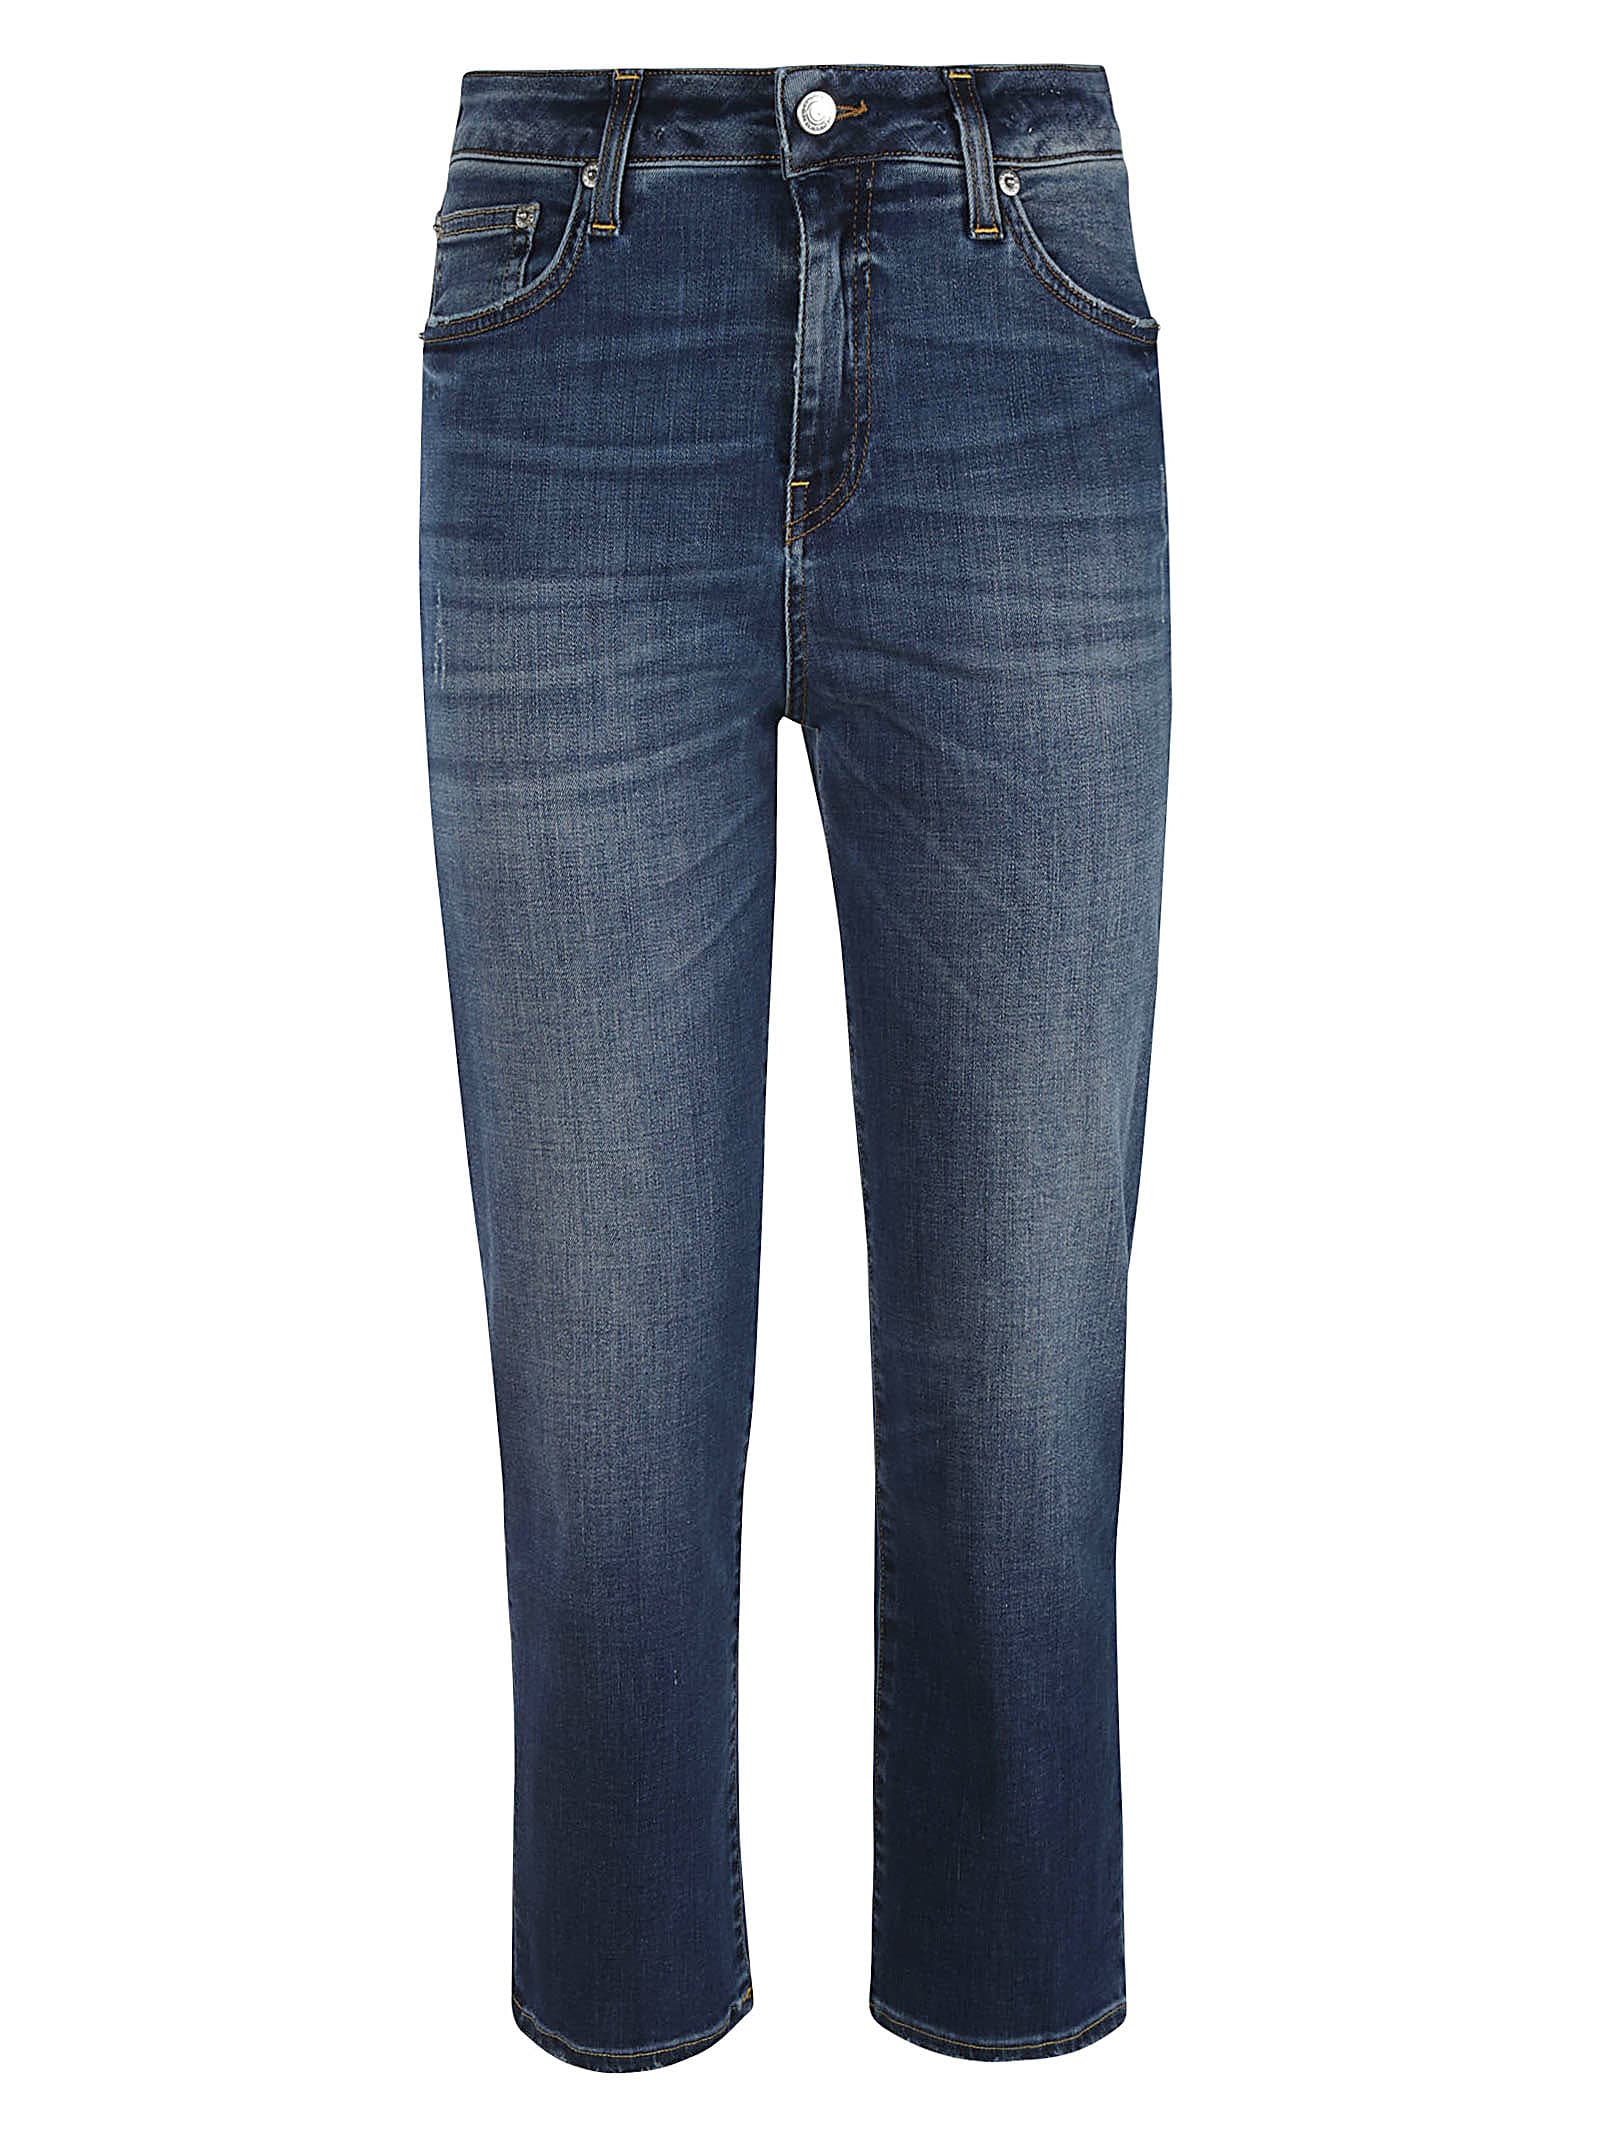 Department 5 Adid Jeans